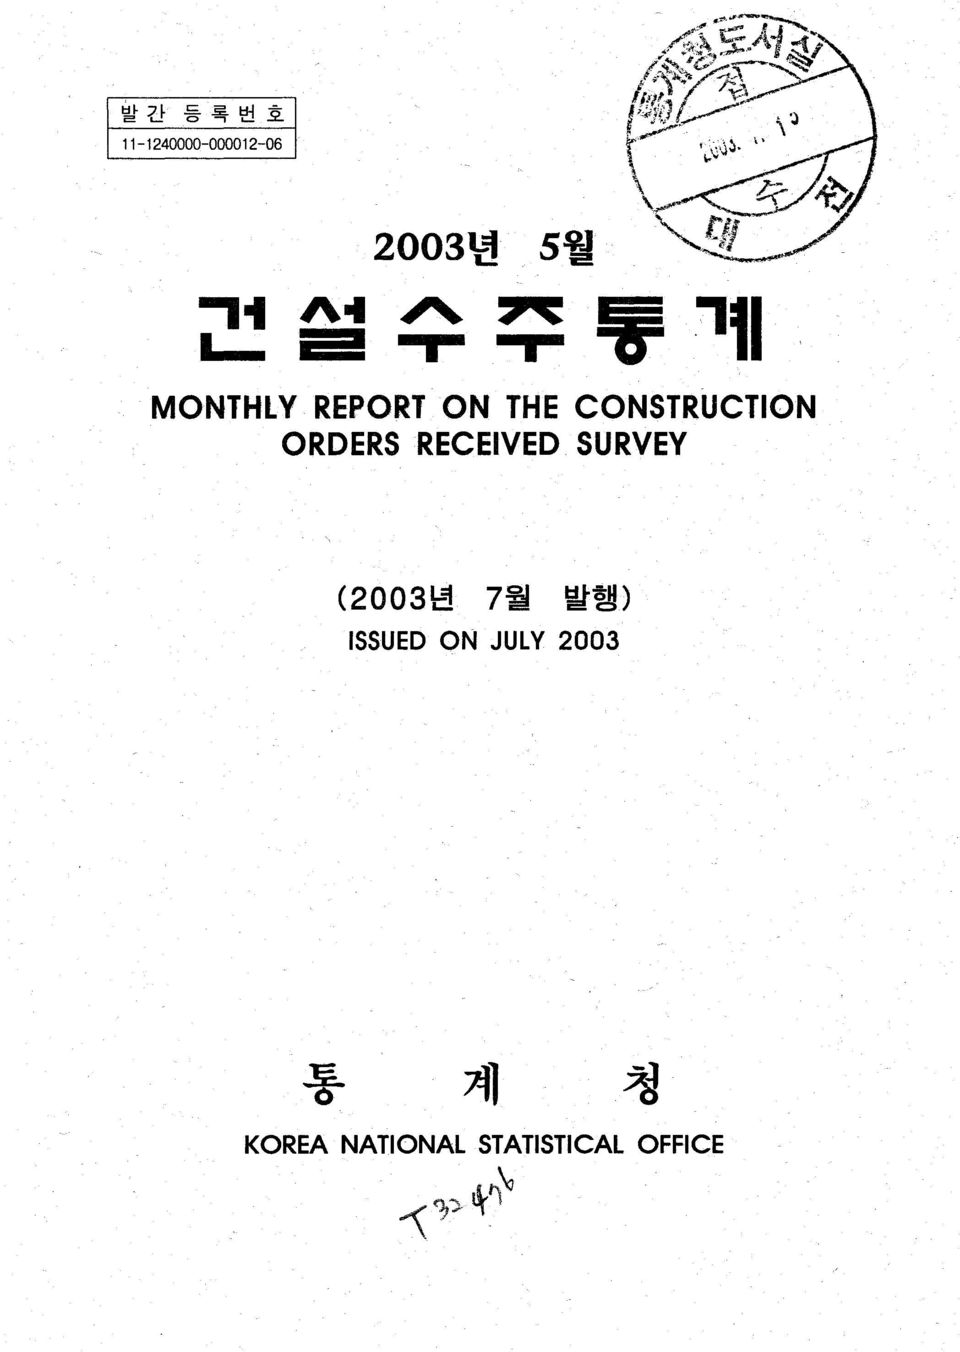 RECEIVED SURVEY (2003 년 7 월 발행) ISSUED